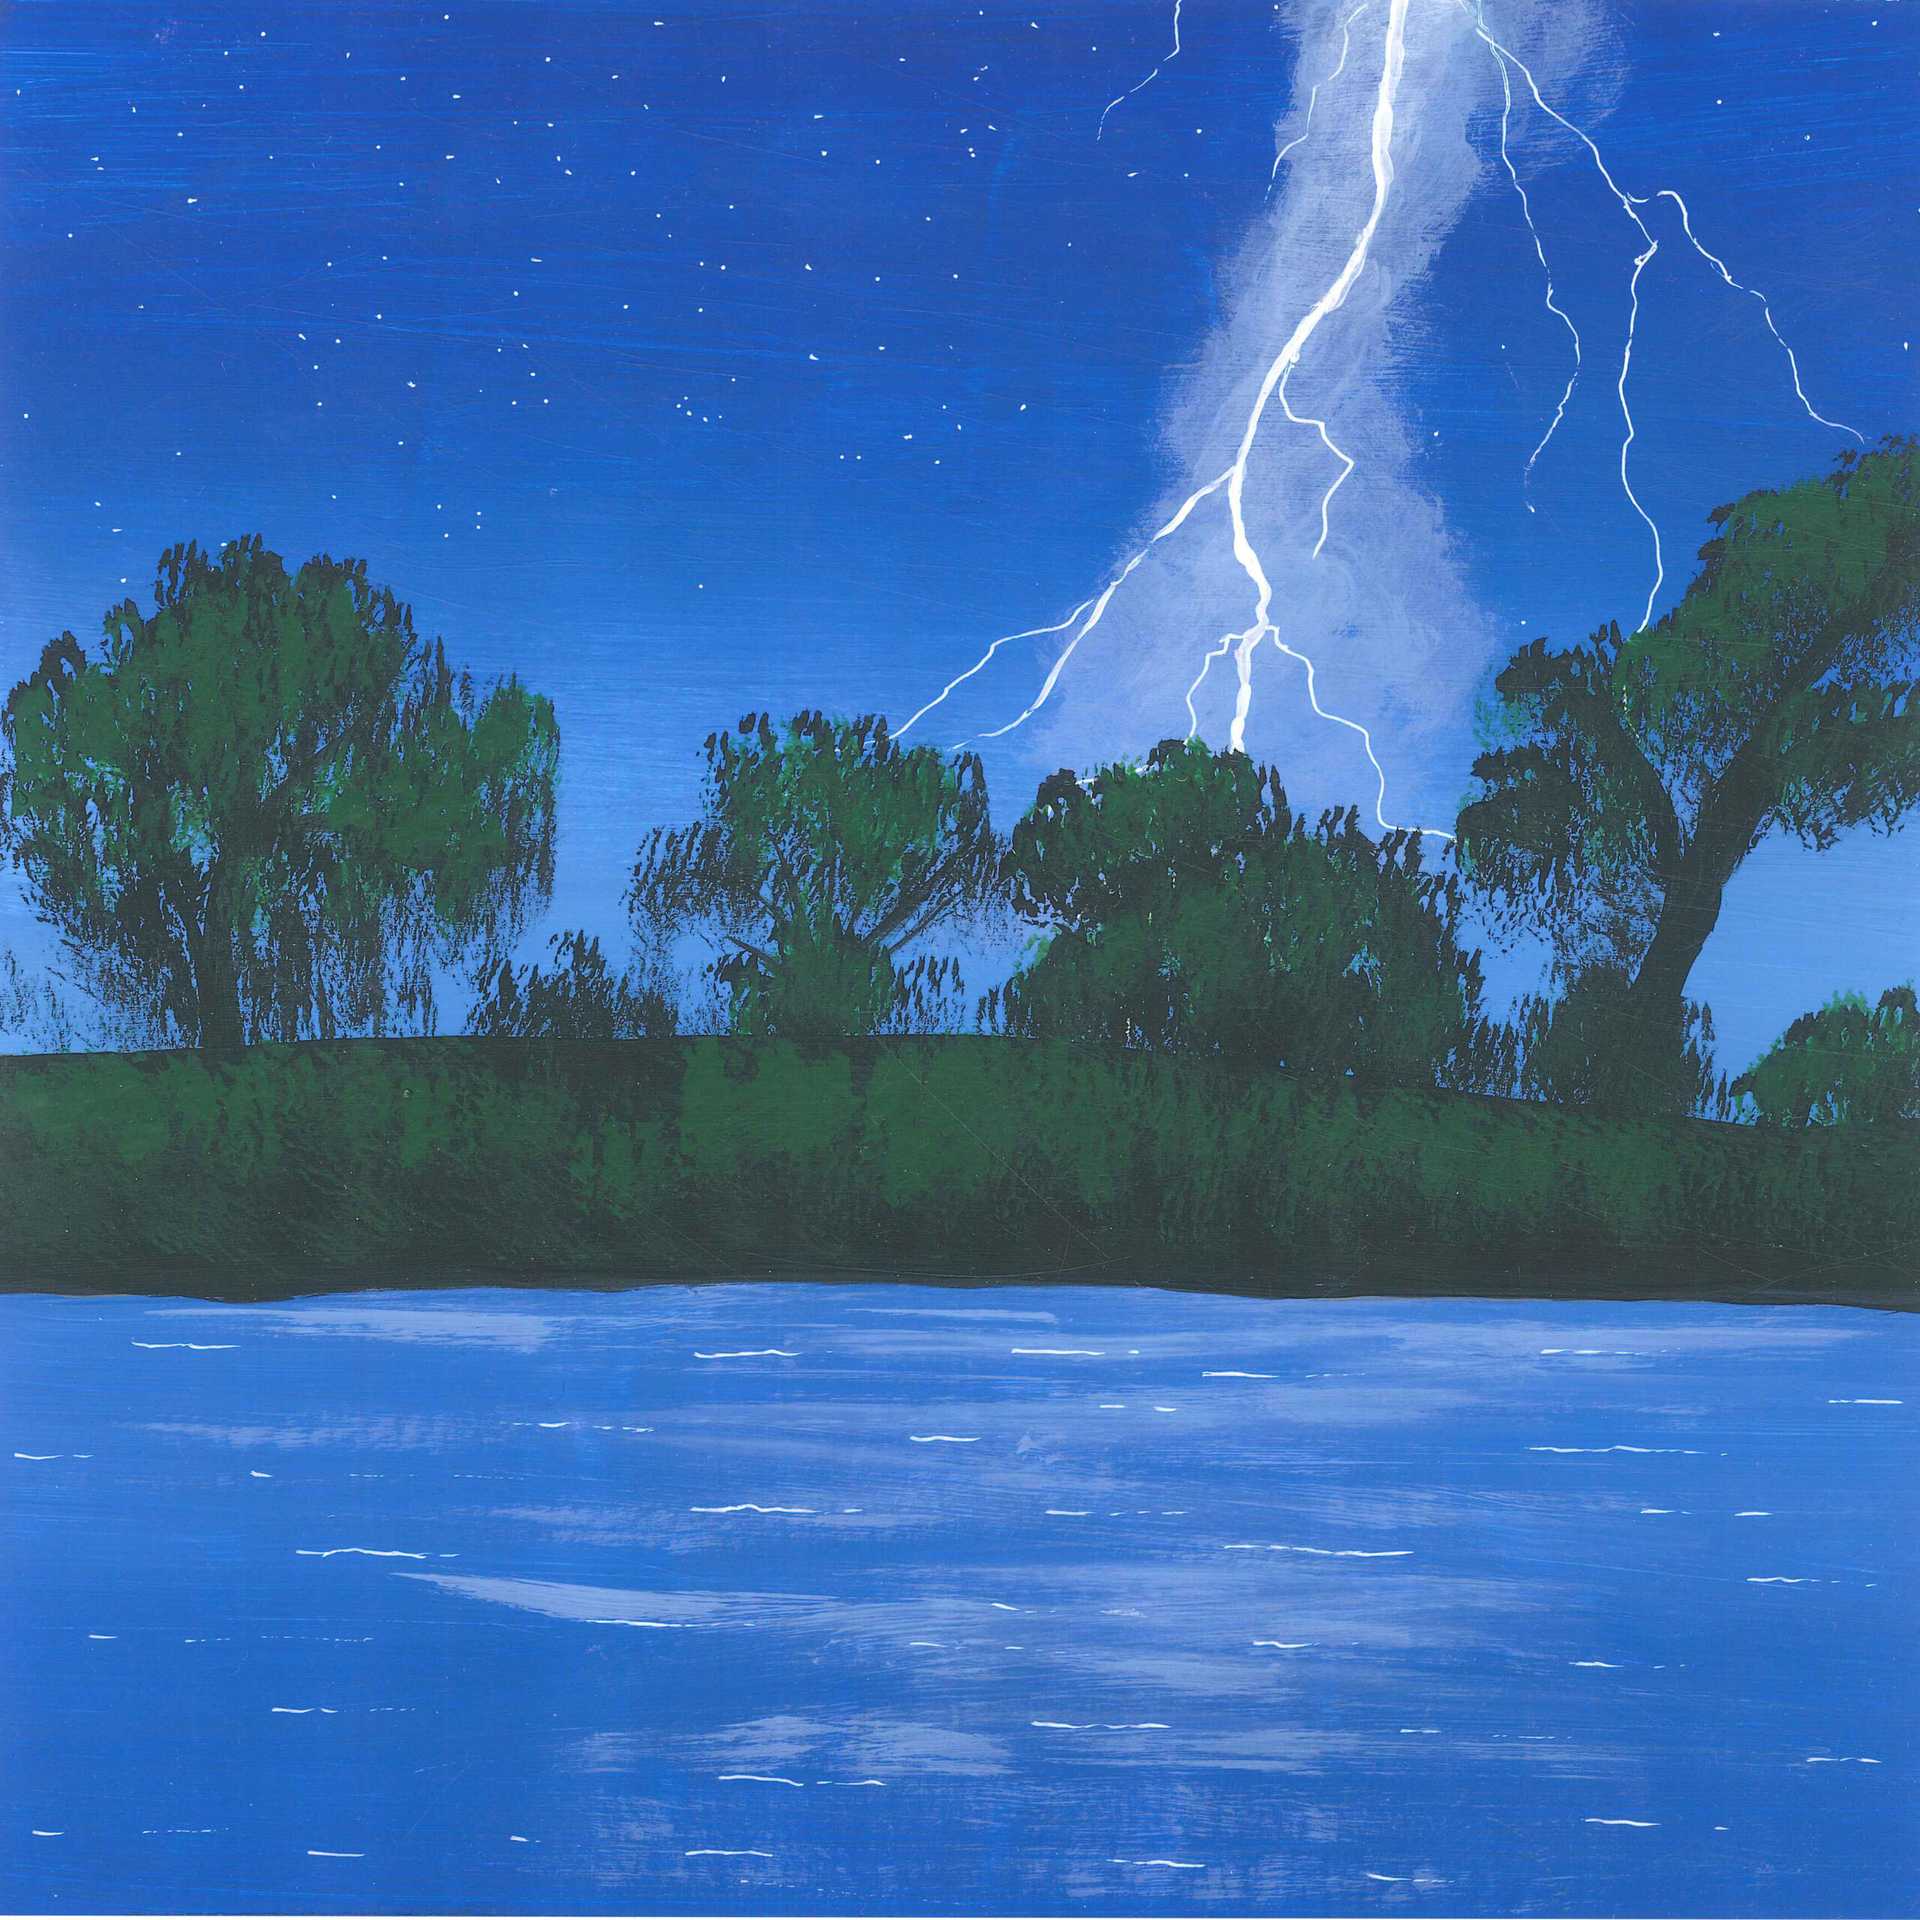 Rainforest Thunderstorm in the Amazon - nature landscape painting - earth.fm